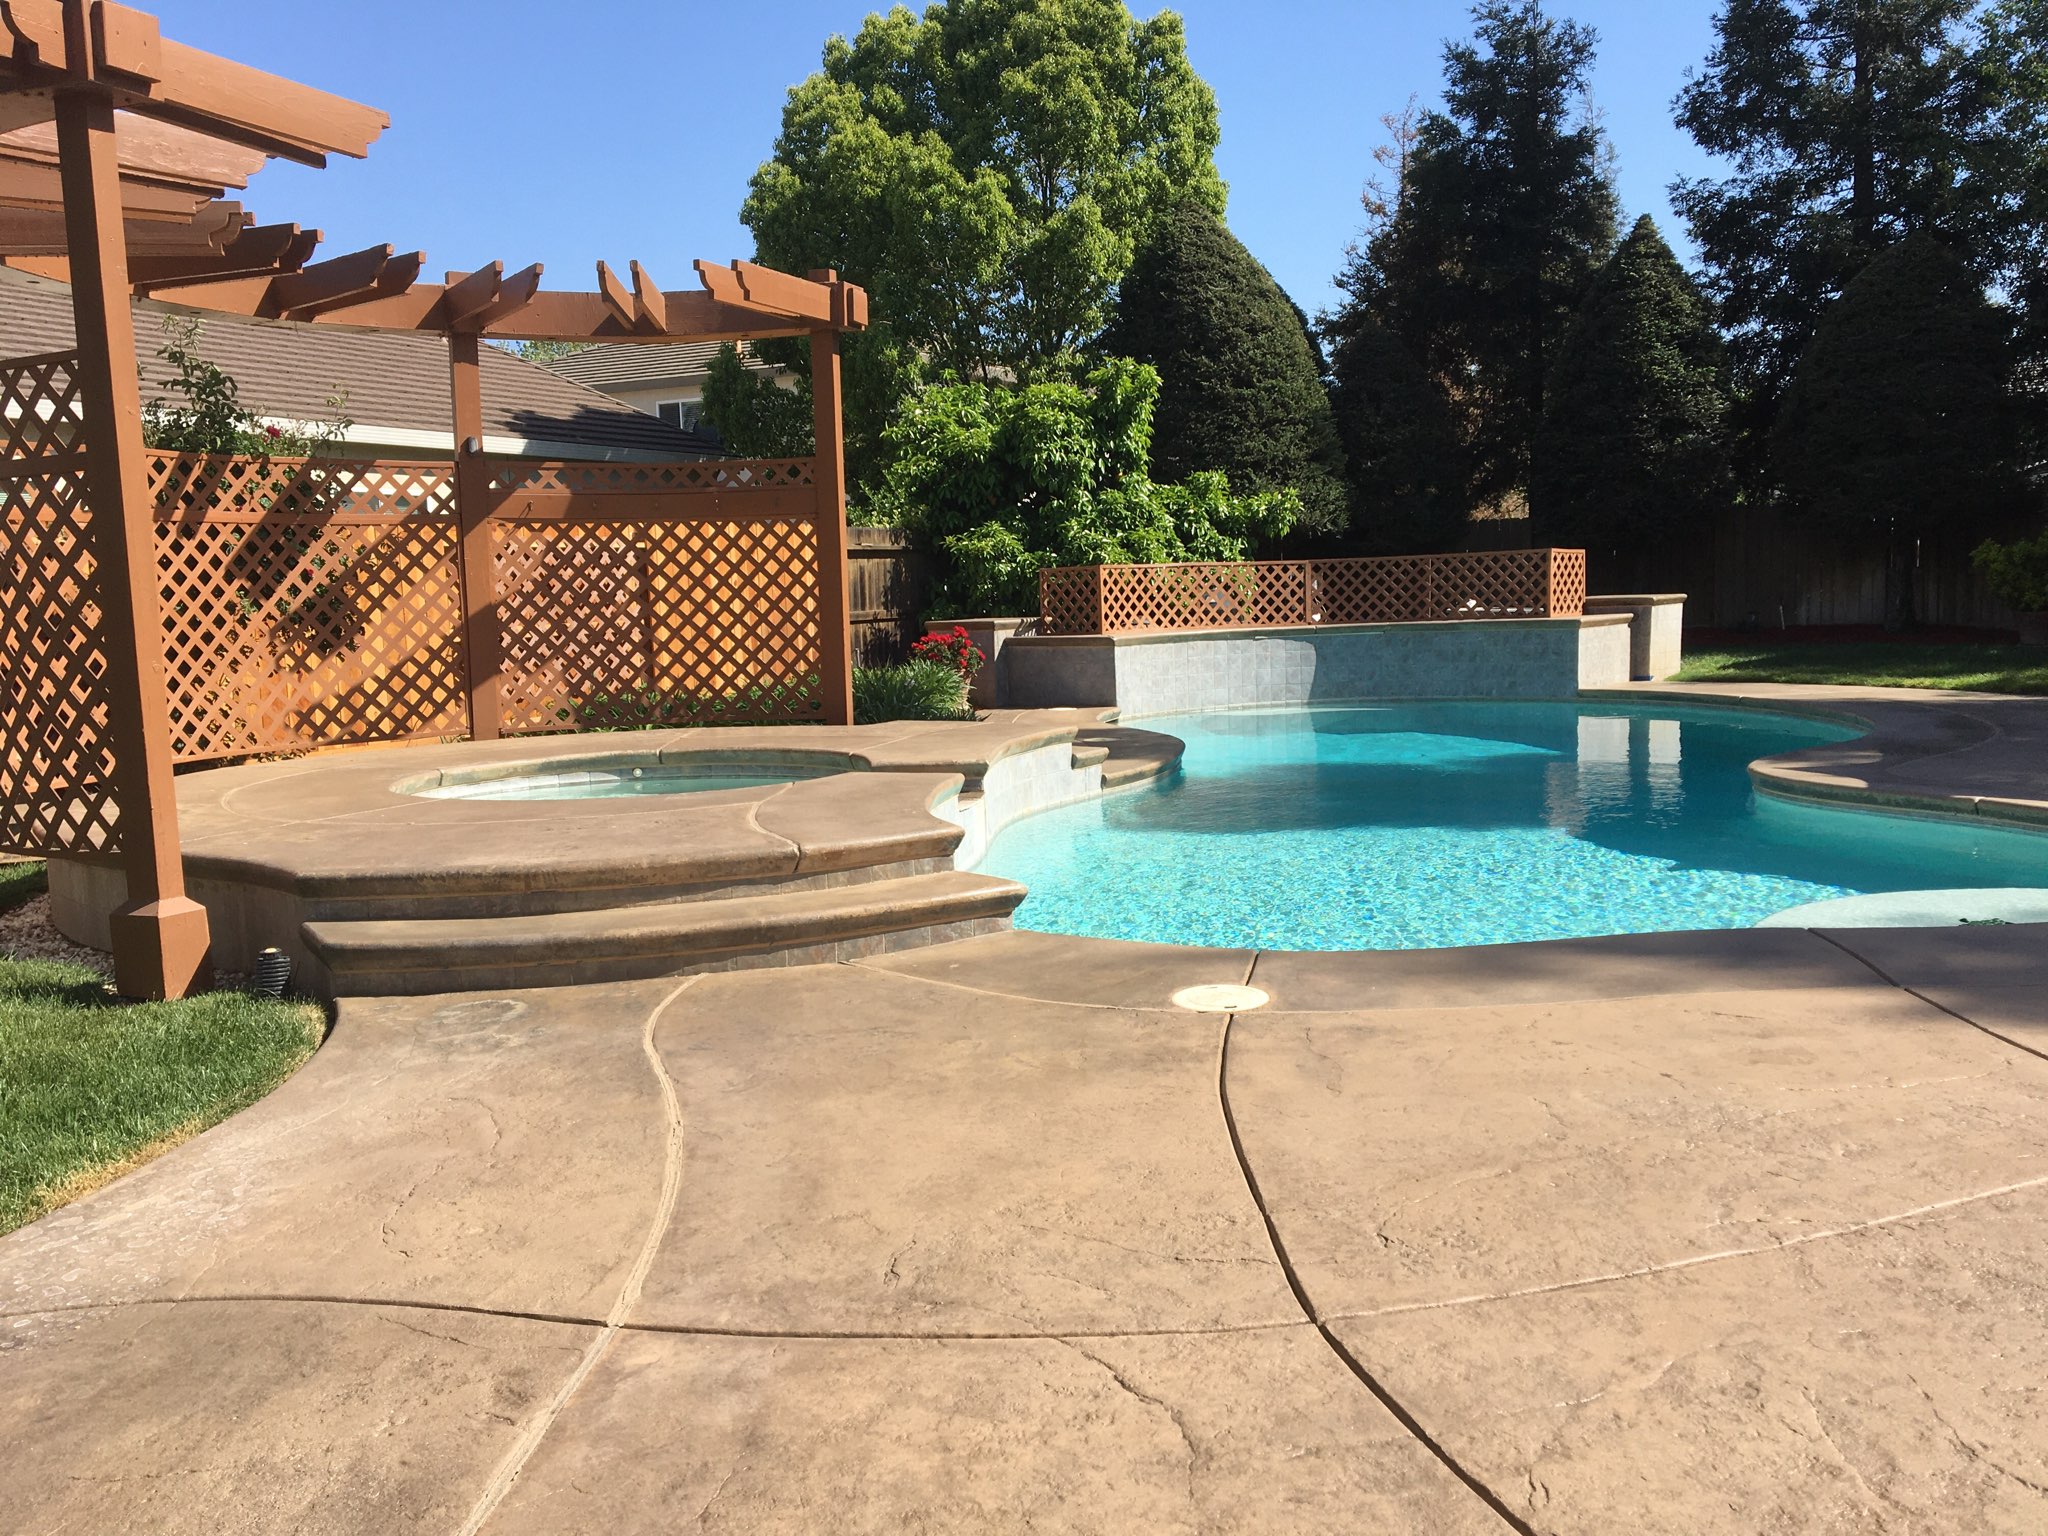 Finished spa and pool deck area showcasing the stunning transformation with the Khaki Antiquing stain and satin sealer on the stamped concrete